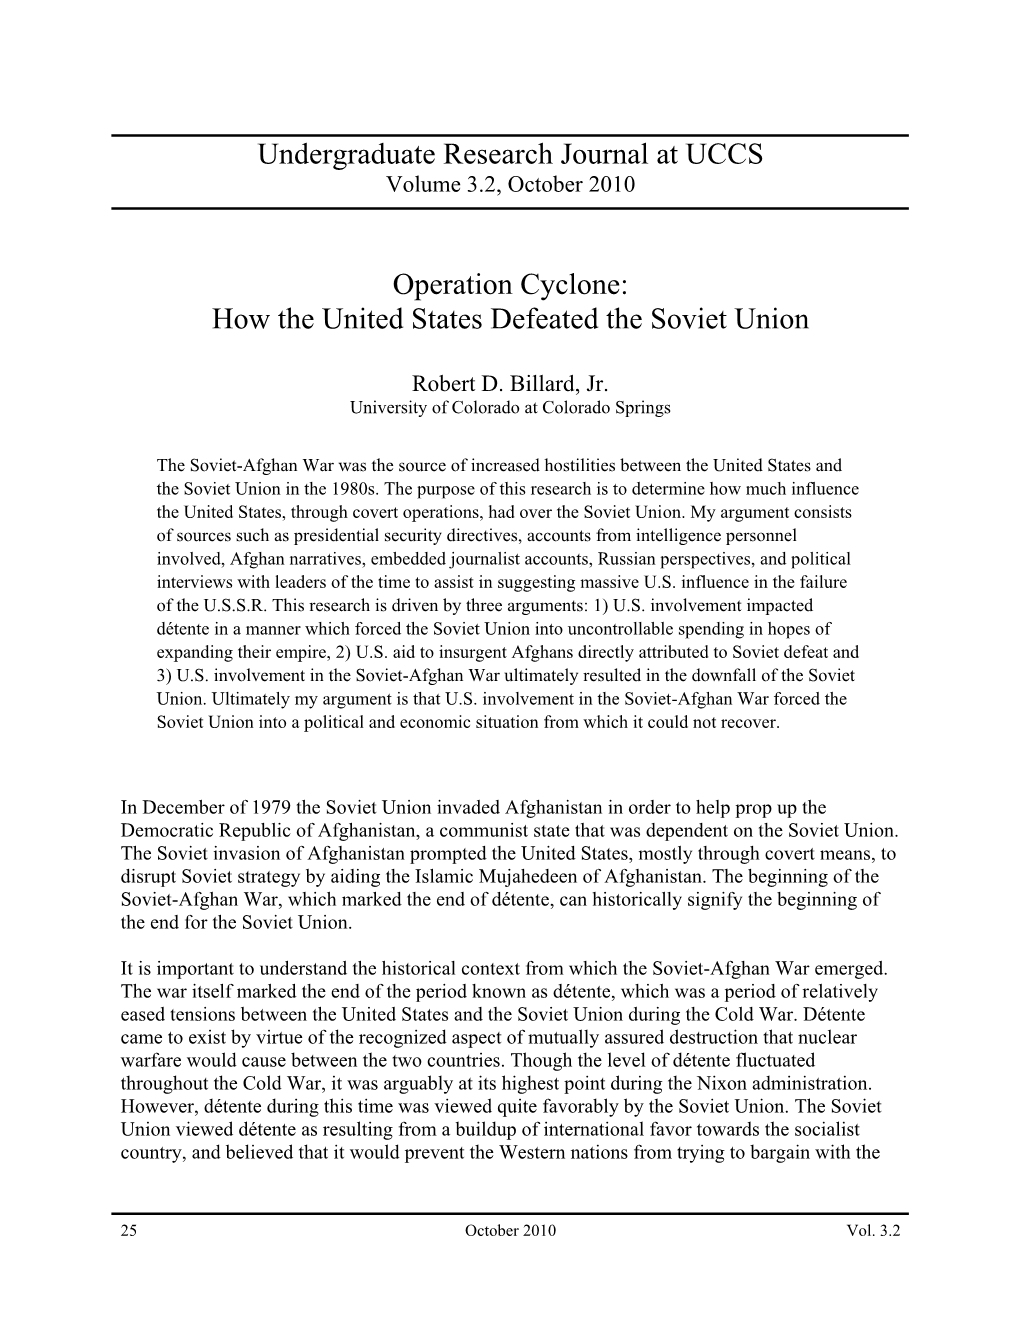 Operation Cyclone: How the United States Defeated the Soviet Union